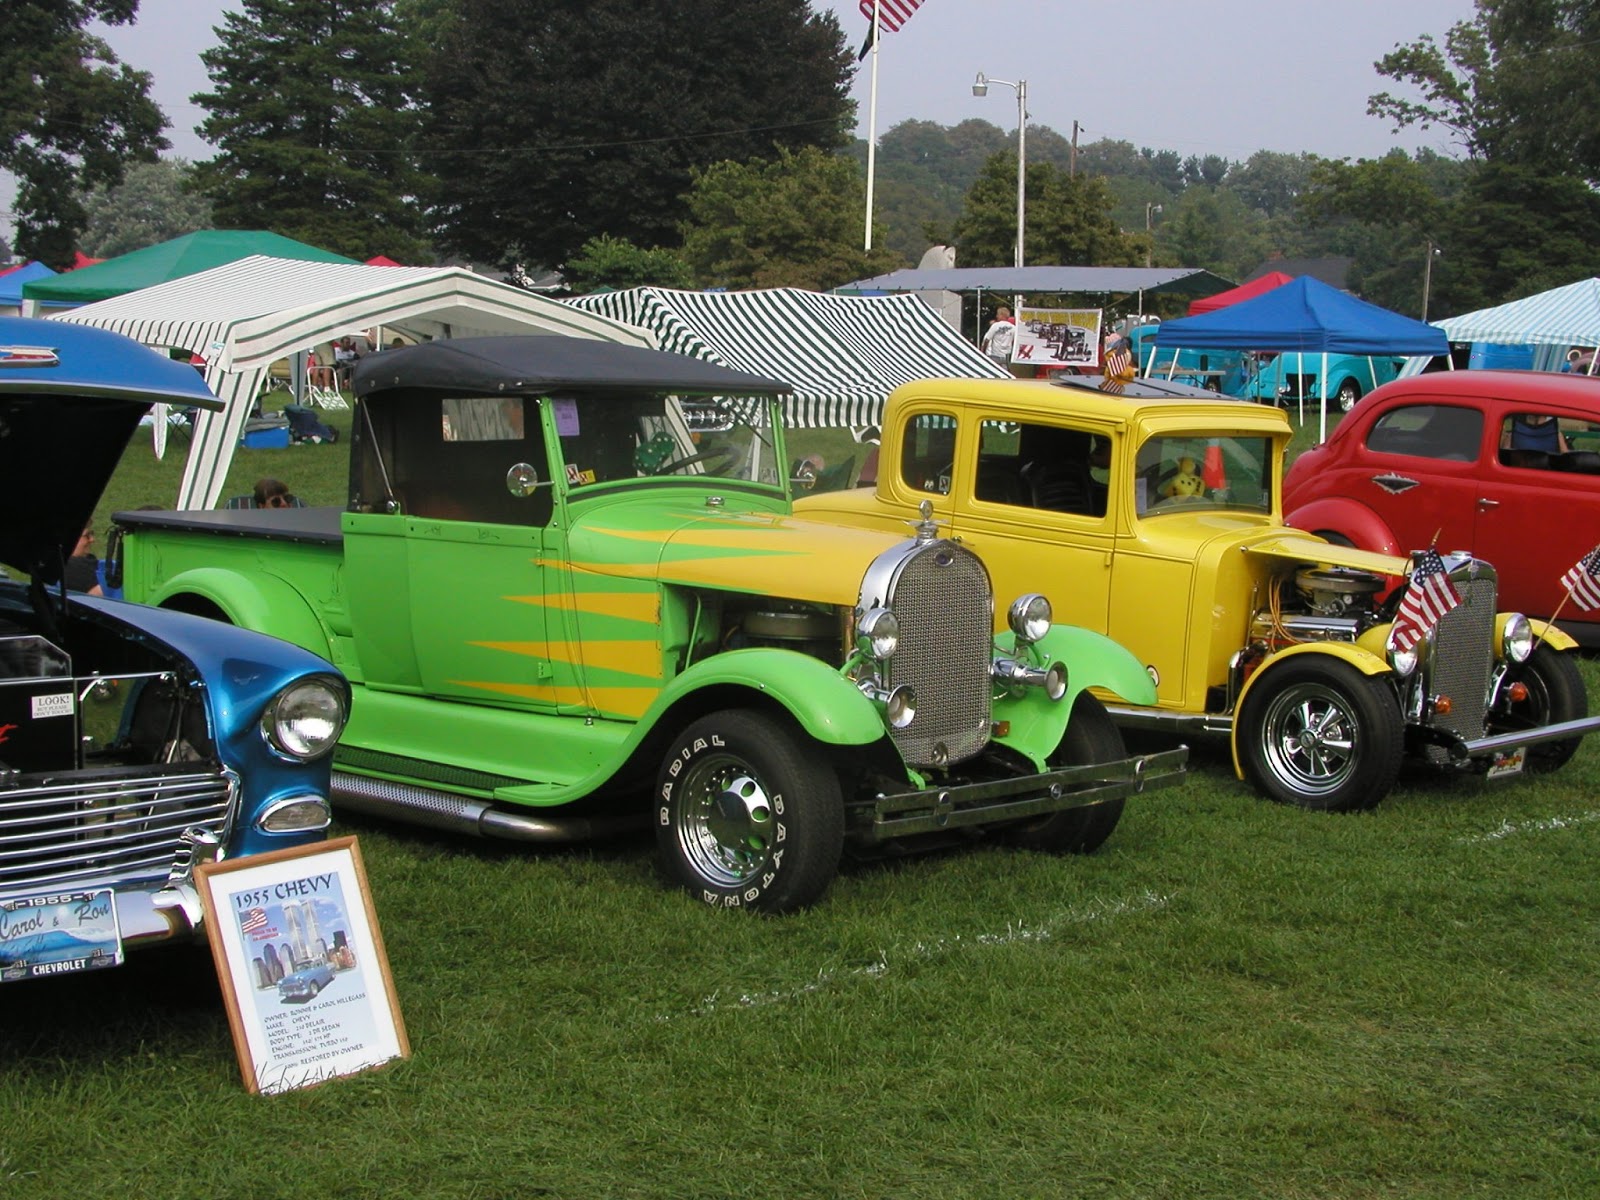 Travel Photos by JAMES Custom Car Show, Macungie, PA Part 1